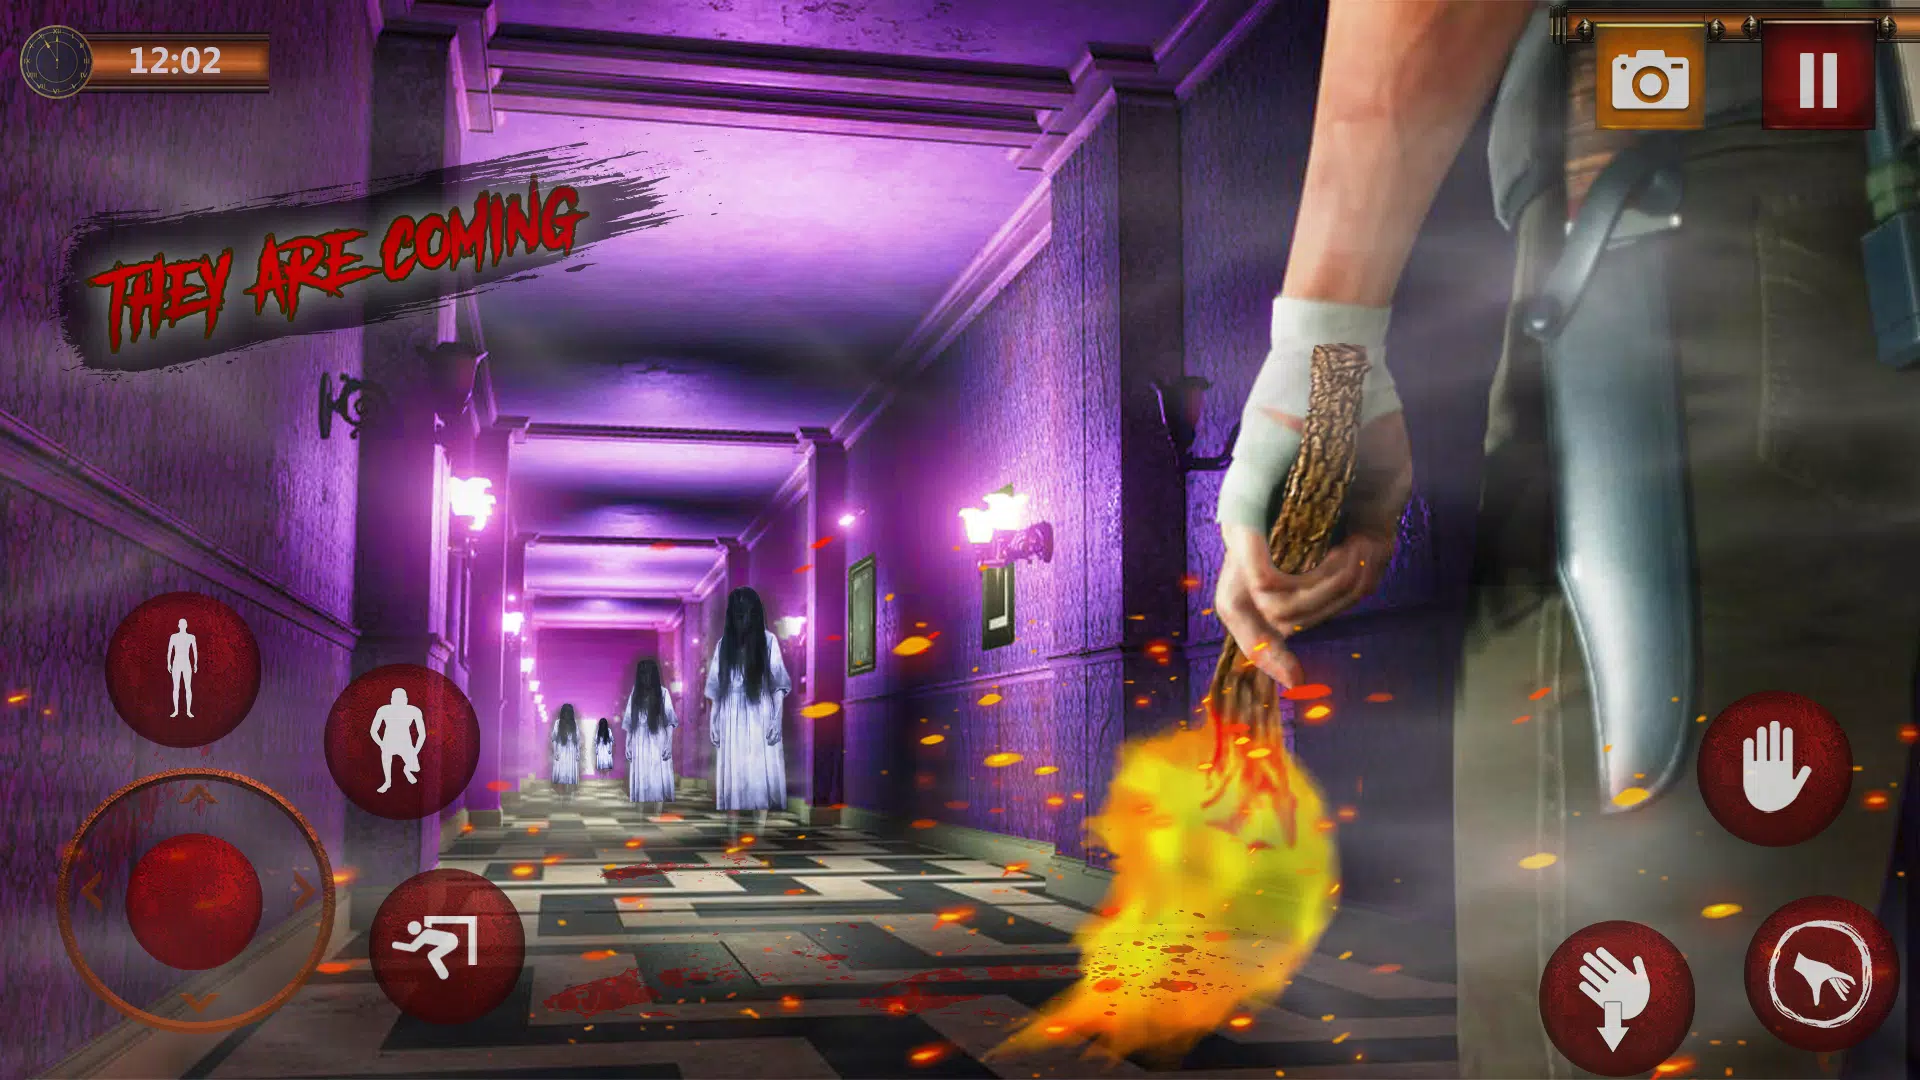 Horror Games - Feel scary fear android iOS apk download for free